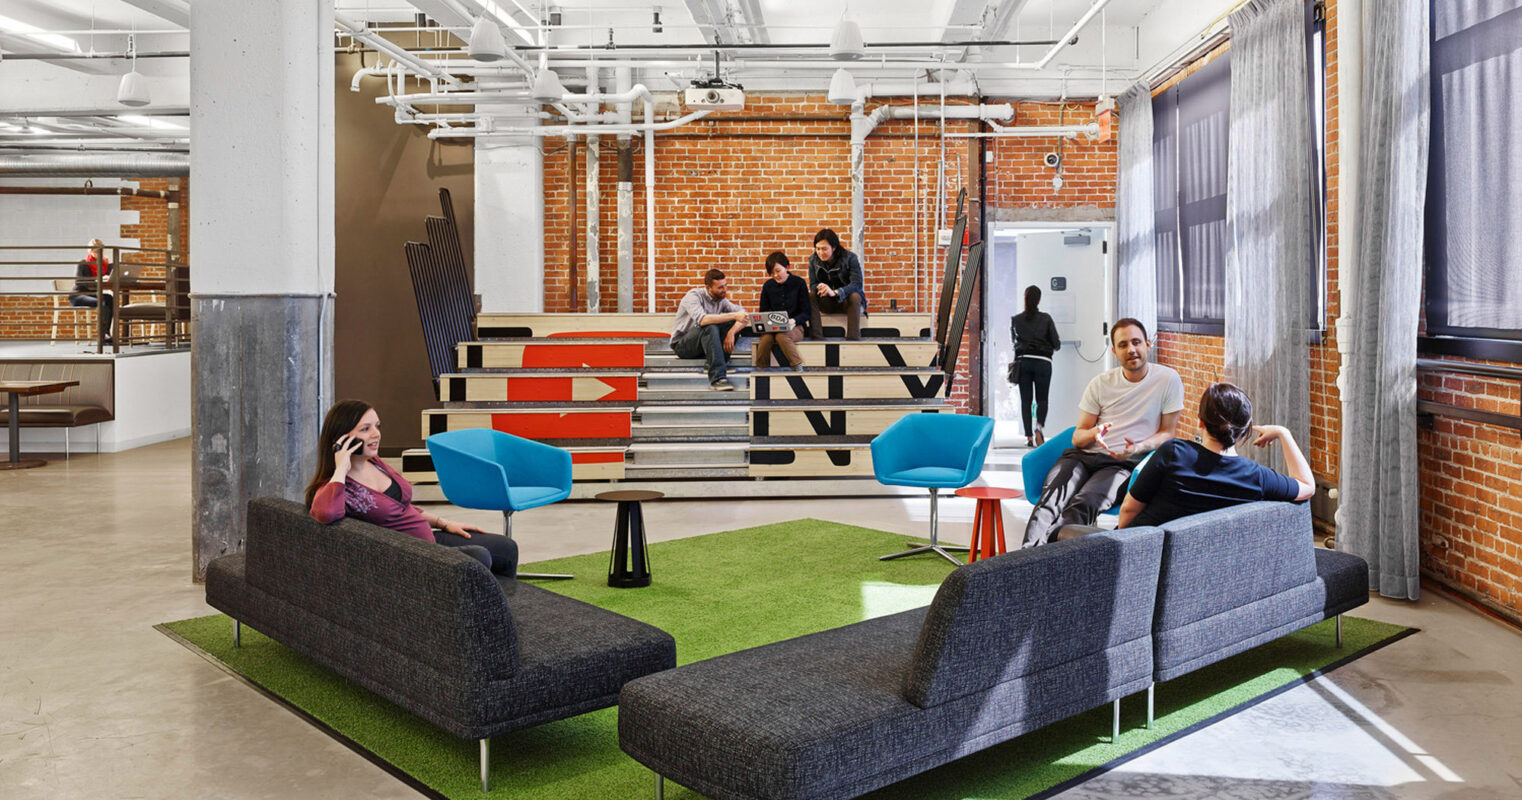 Modern loft-style office space with exposed brick walls and white ductwork against a high ceiling. Employees engage casually on colorful modular furniture atop a vibrant green area rug, reflecting an innovative and collaborative work environment.